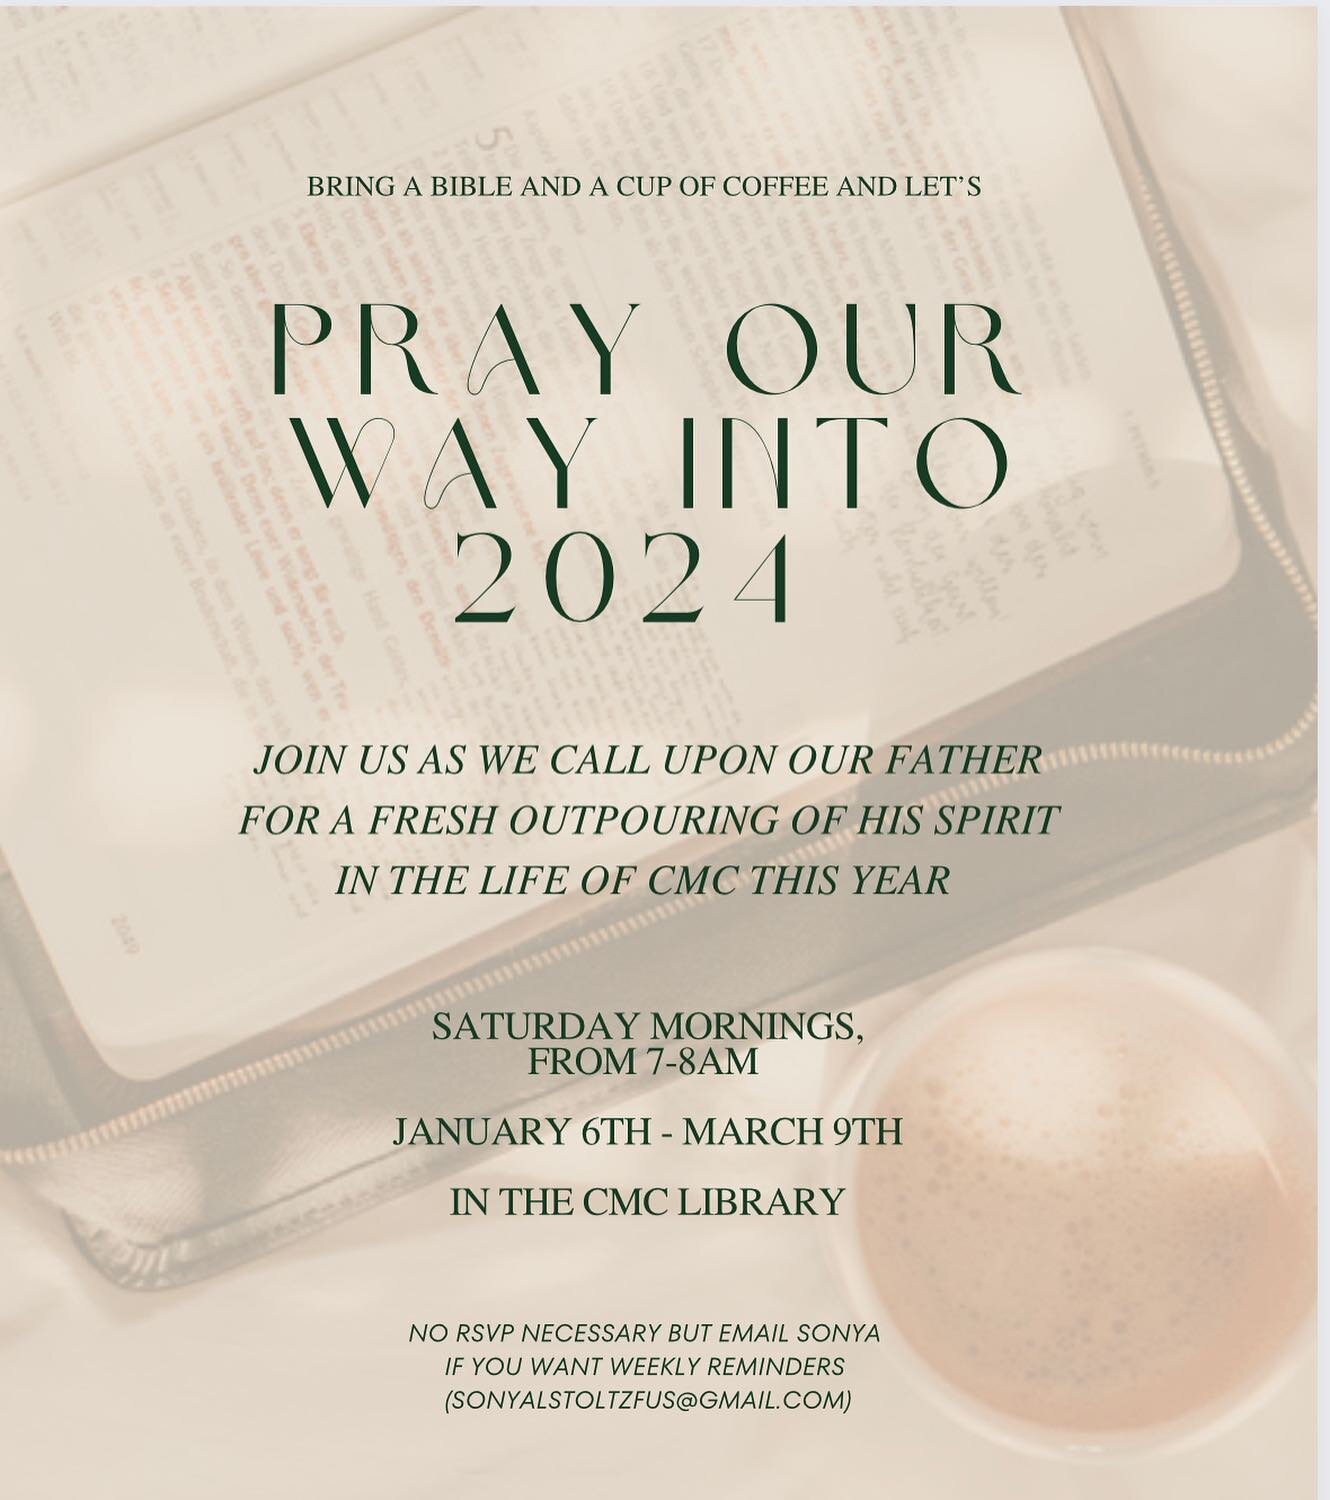 Happy New Year! Grab your Bible and a cup of coffee and just us to pray our way into 2024. 
We will be meeting in the CMC library on Saturday mornings starting this Saturday! We hope to see you there!